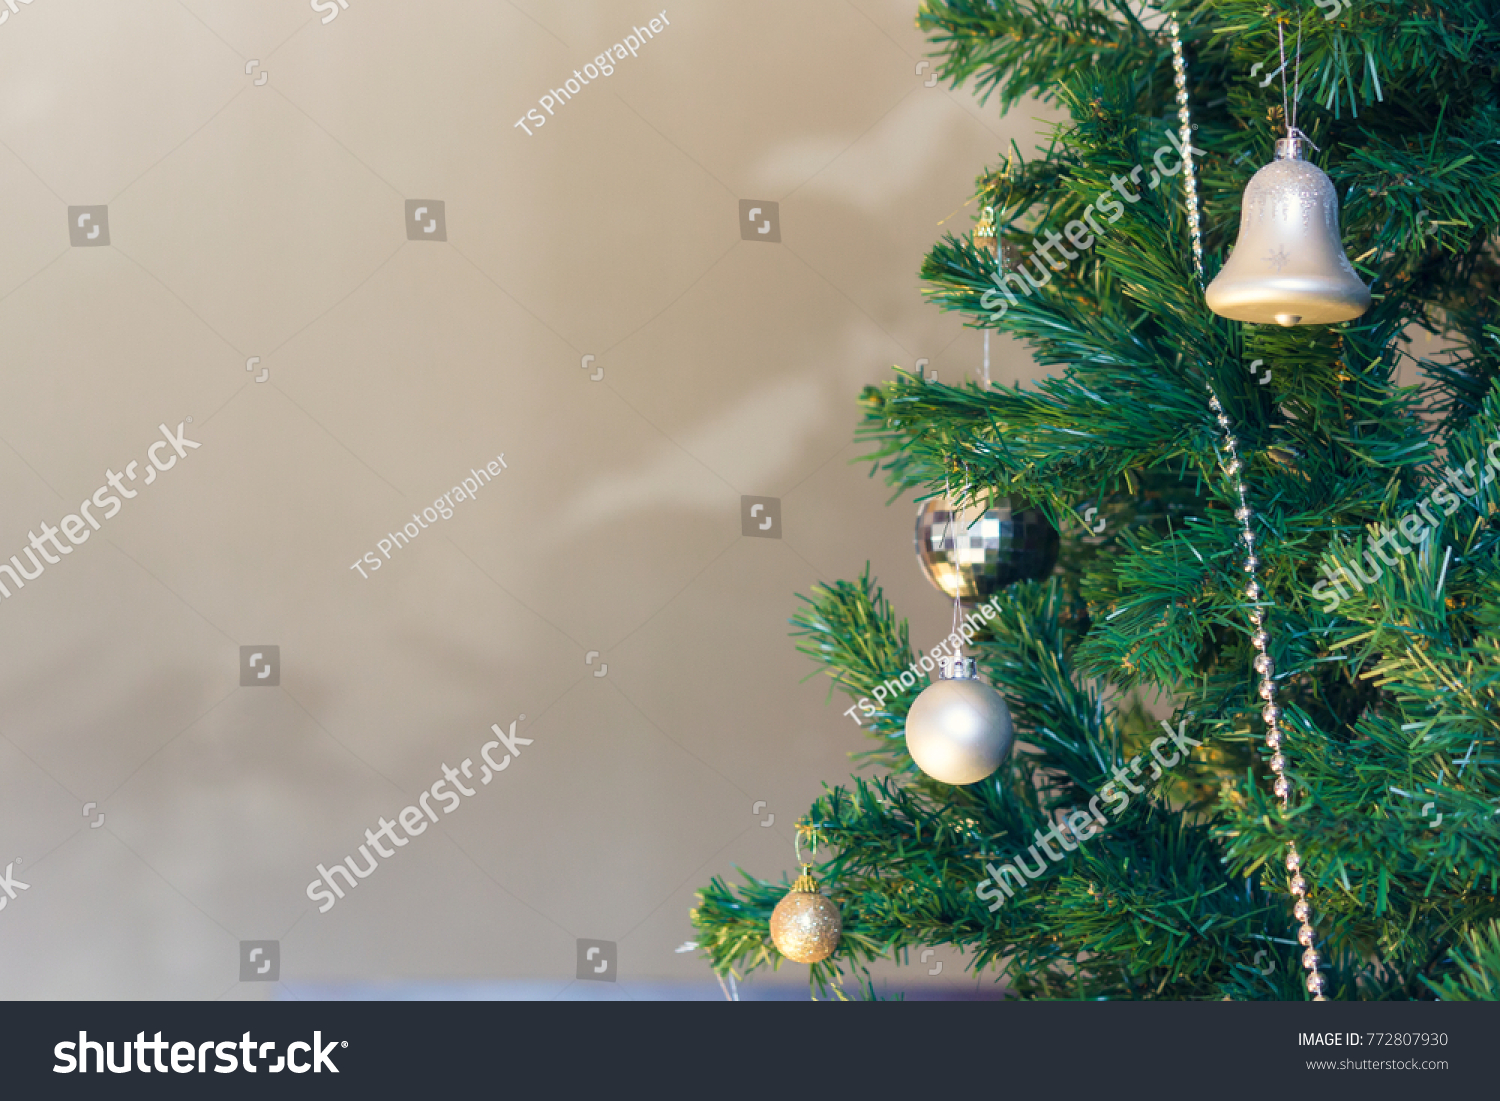 A Decorated Christmas tree #772807930